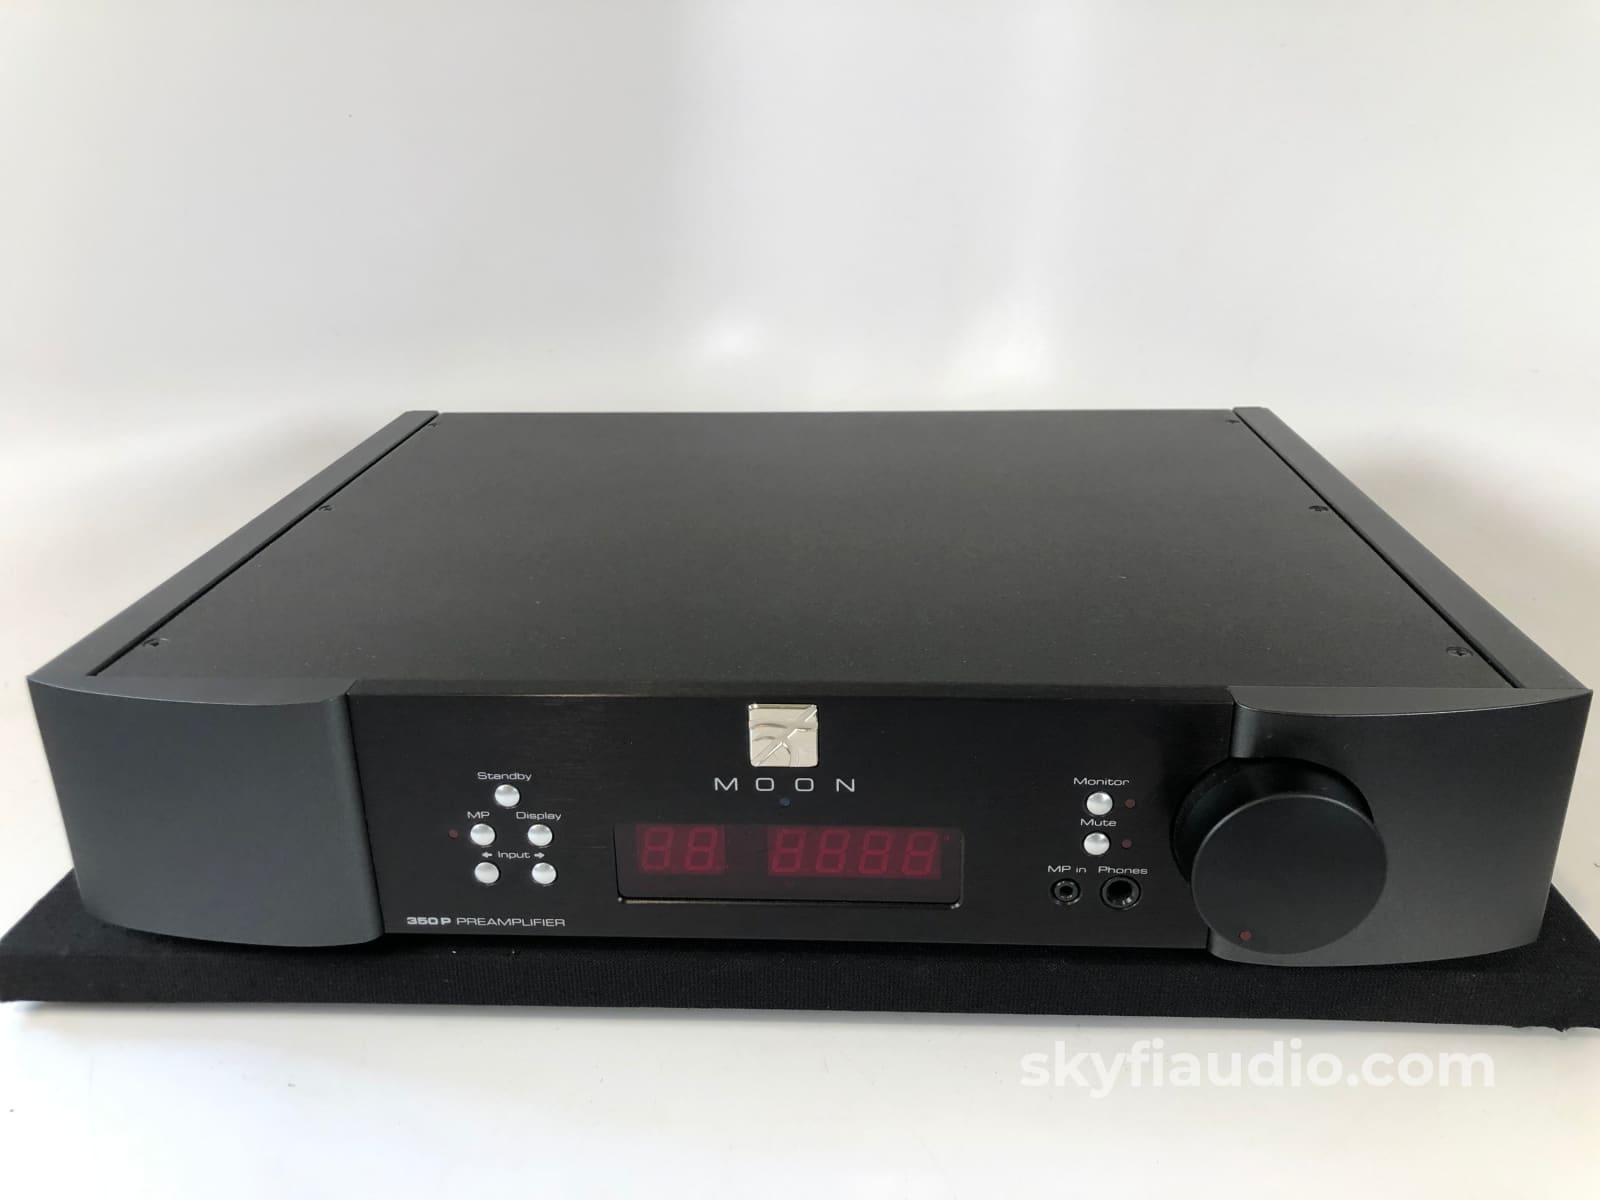 Simaudio 350P Analog Preamp/Dac - Complete And Like New Preamplifier